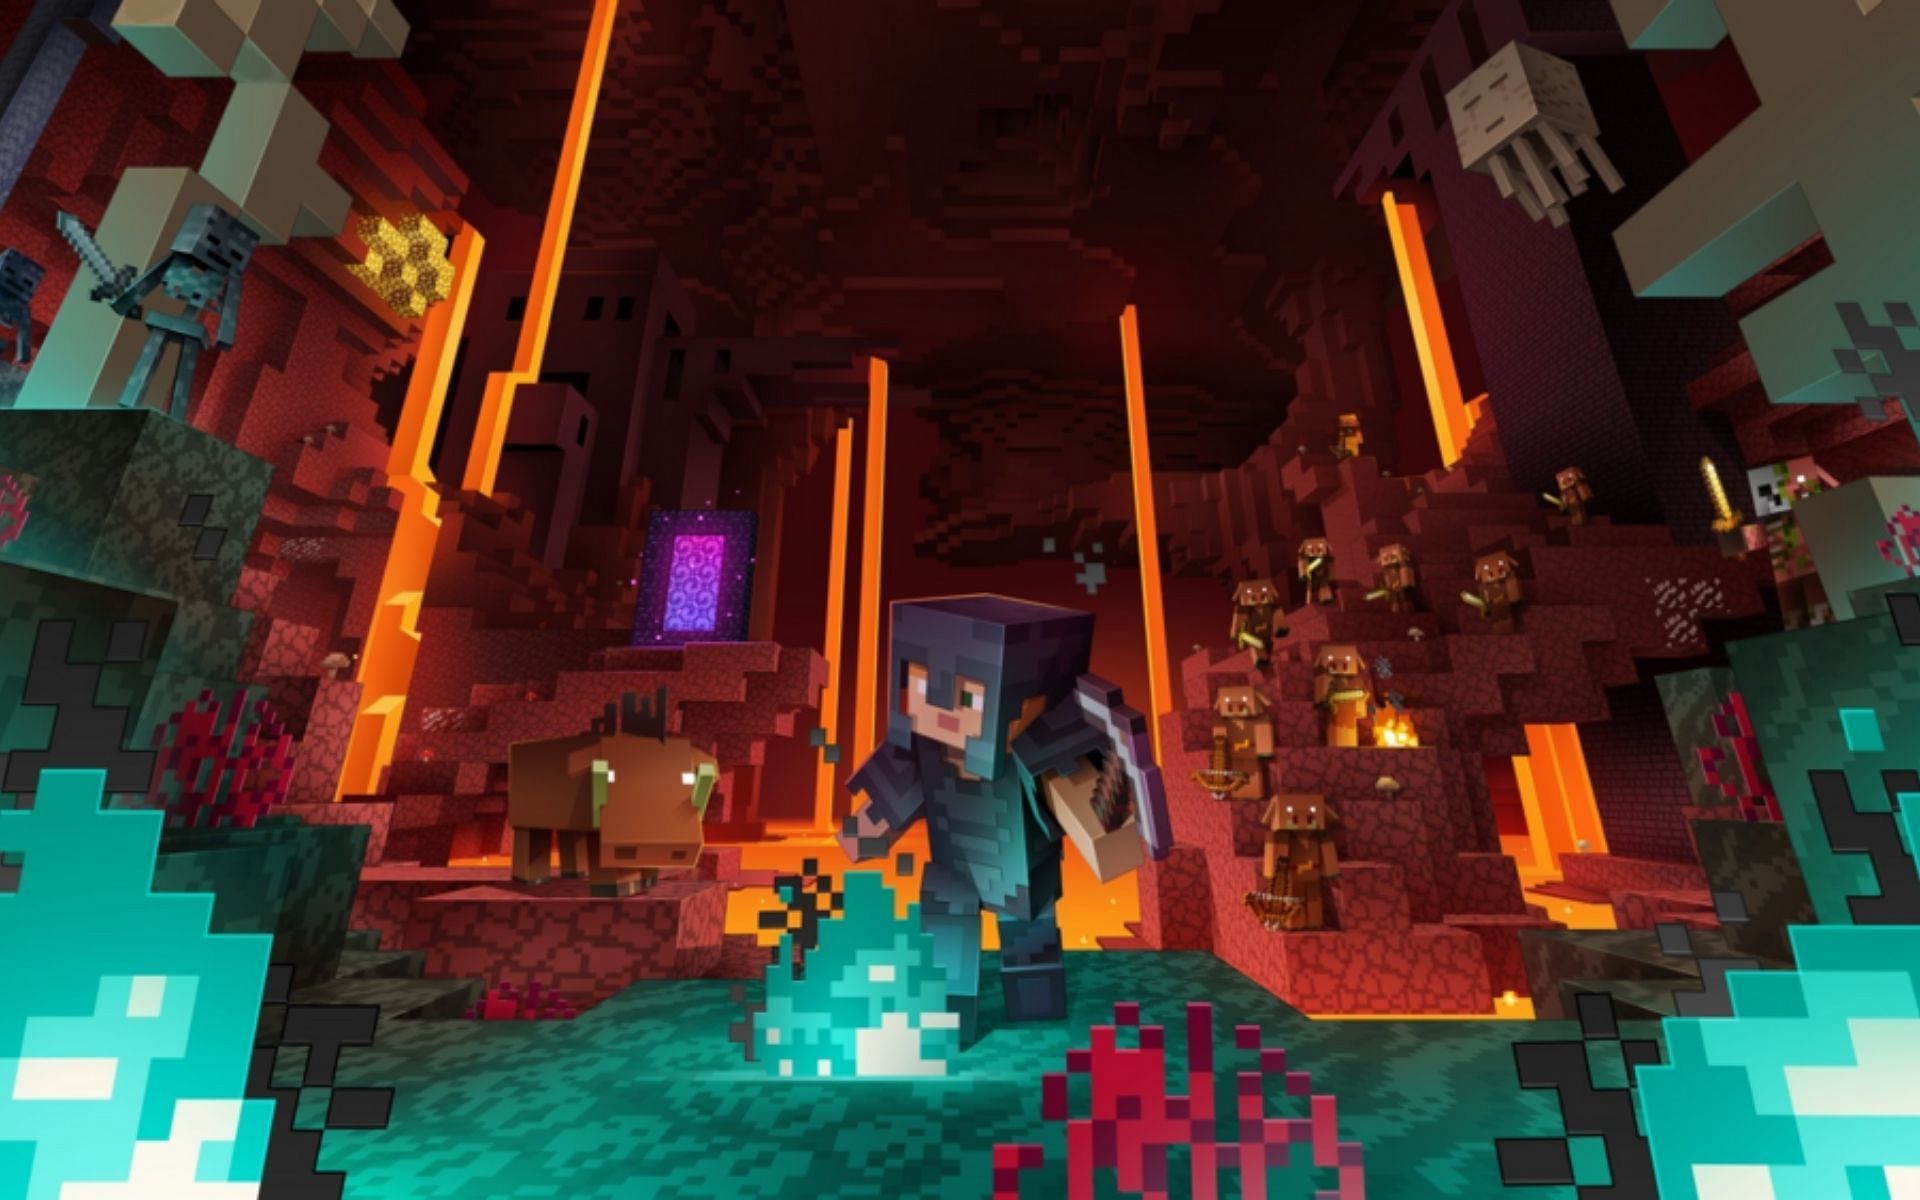 What Level Does Netherite Spawn in Minecraft? Answered